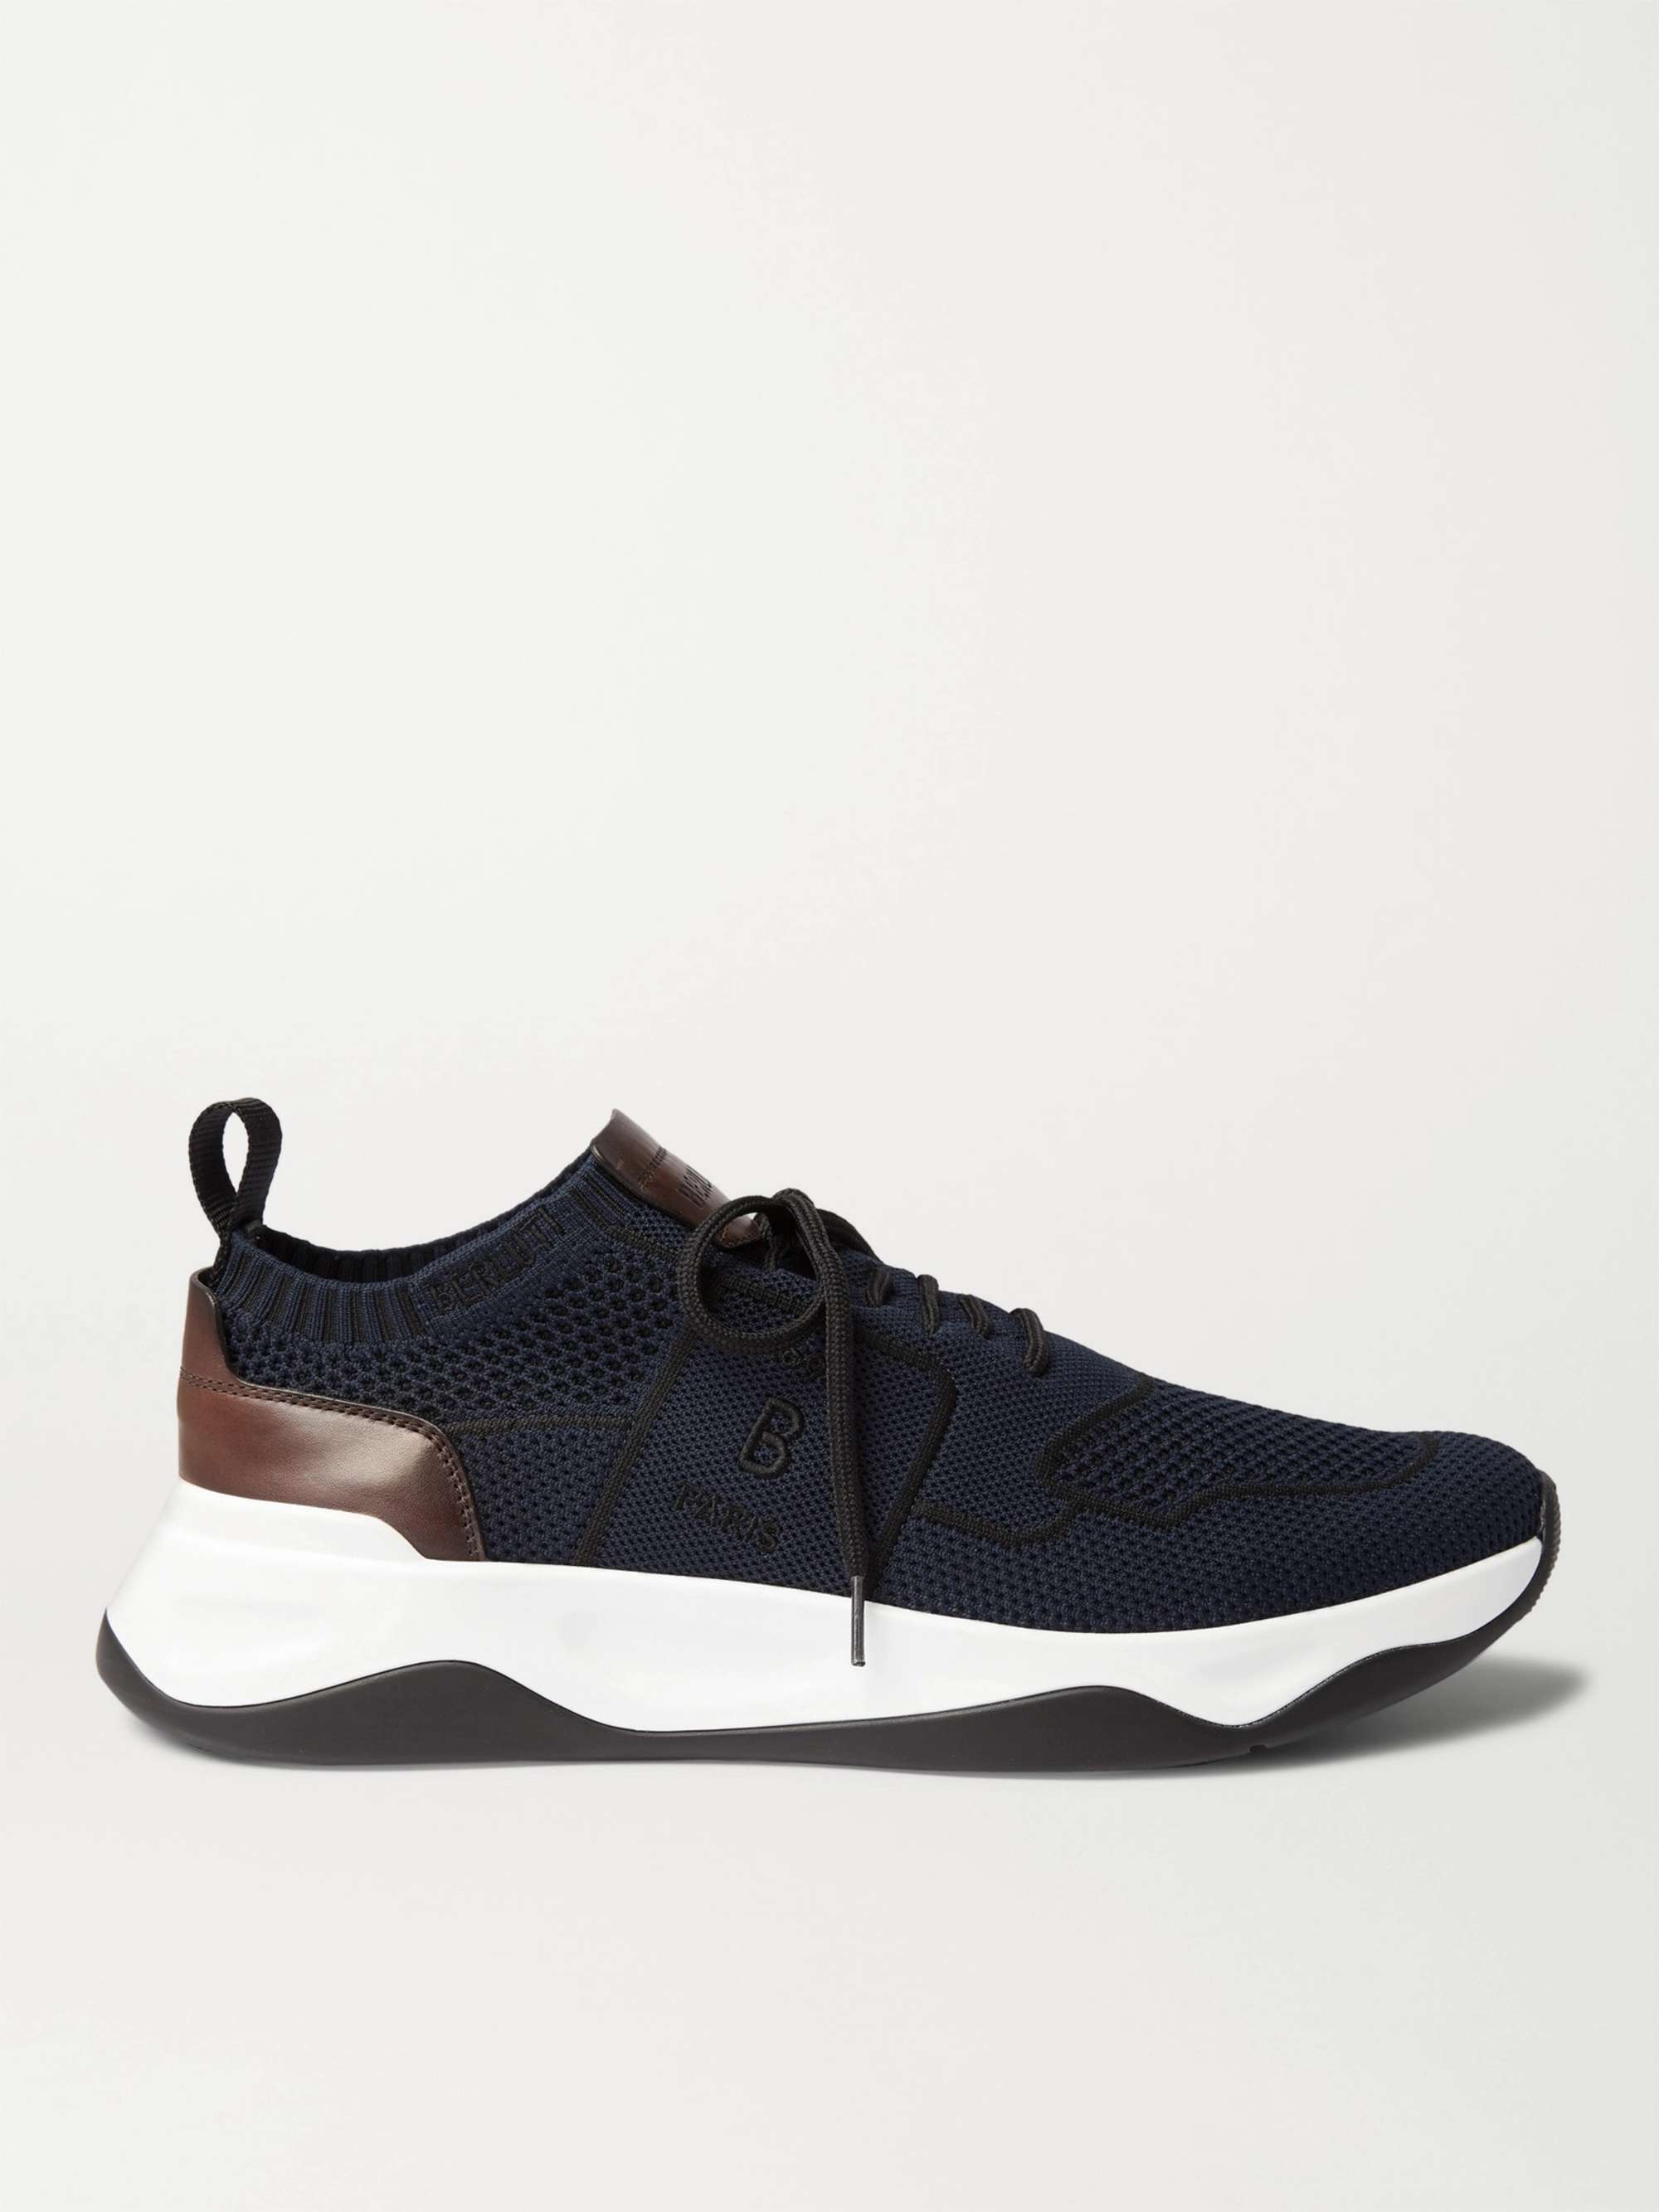 BERLUTI Shadow Leather-Trimmed Mesh Sneakers | MR PORTER